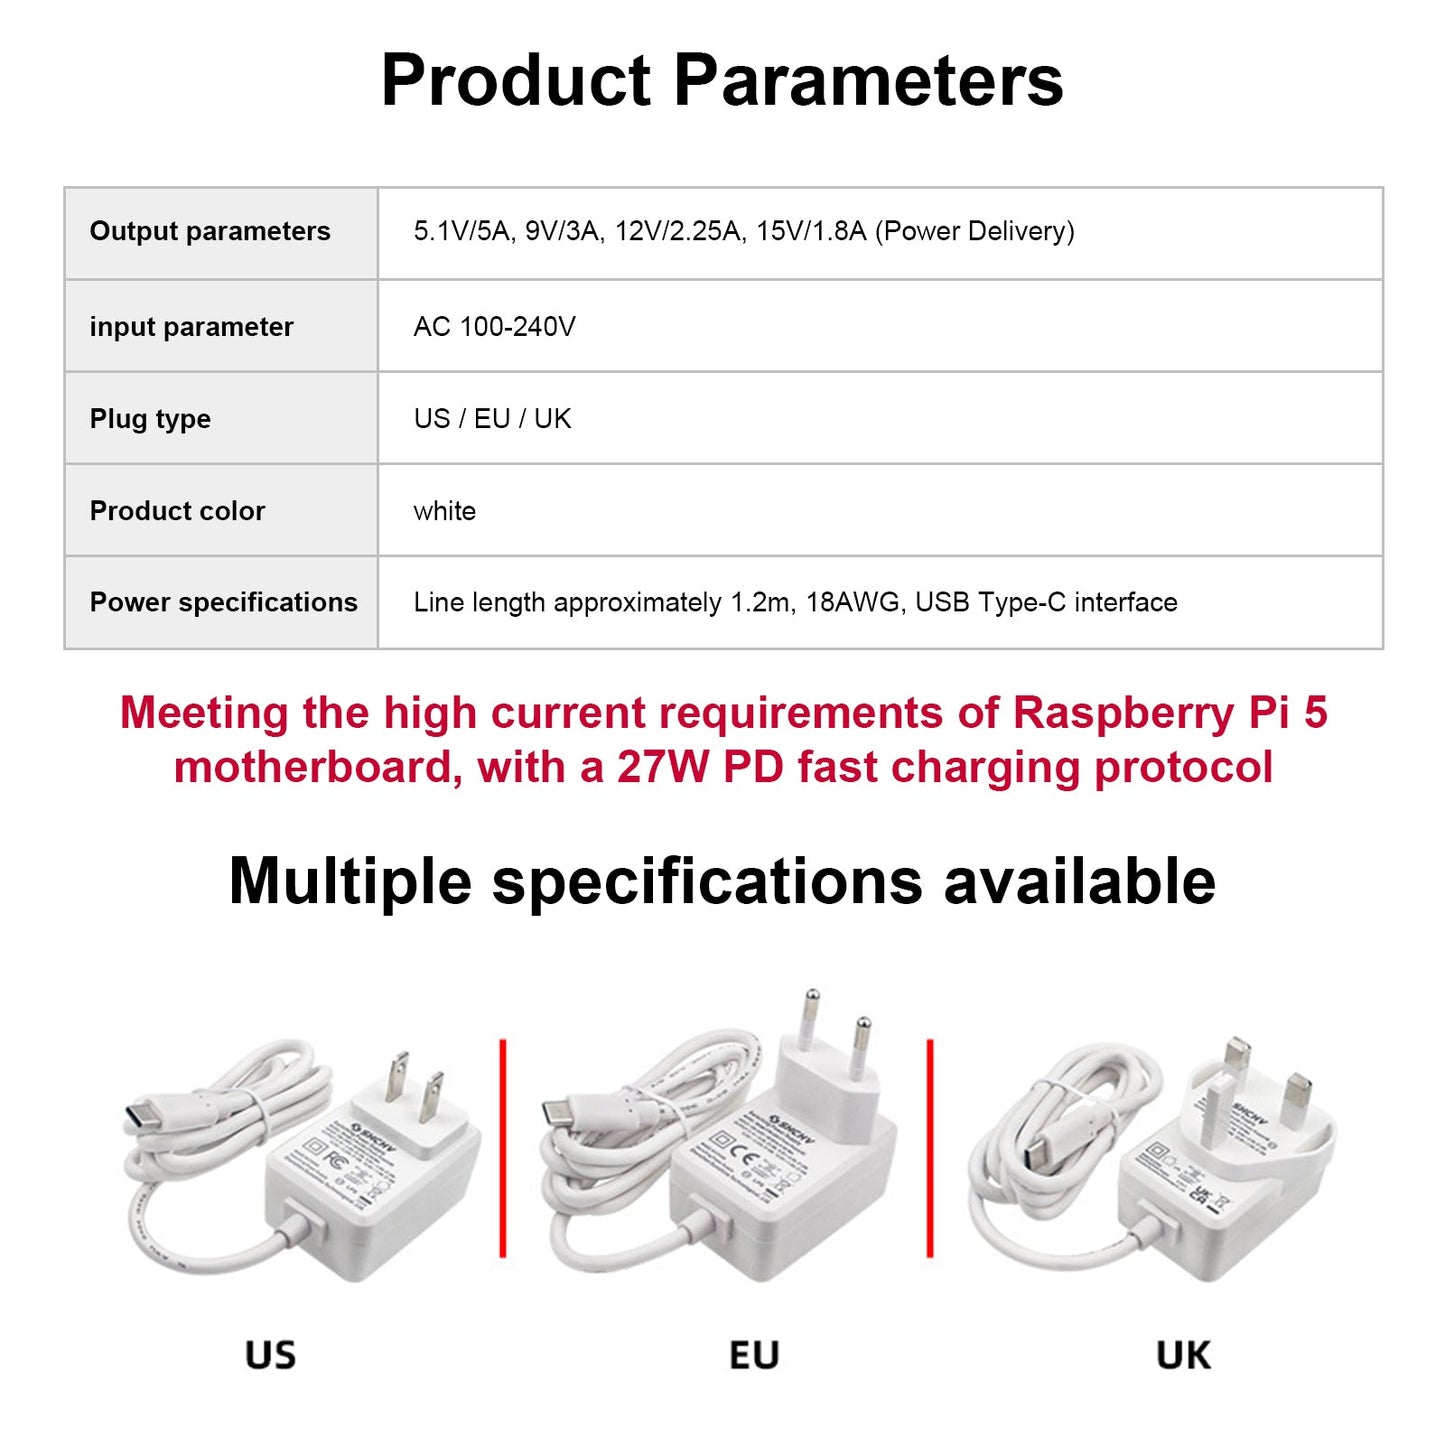 Raspberry Pi 5 Power Adapter USB-C Interface 27W Power 5V5A Full Current